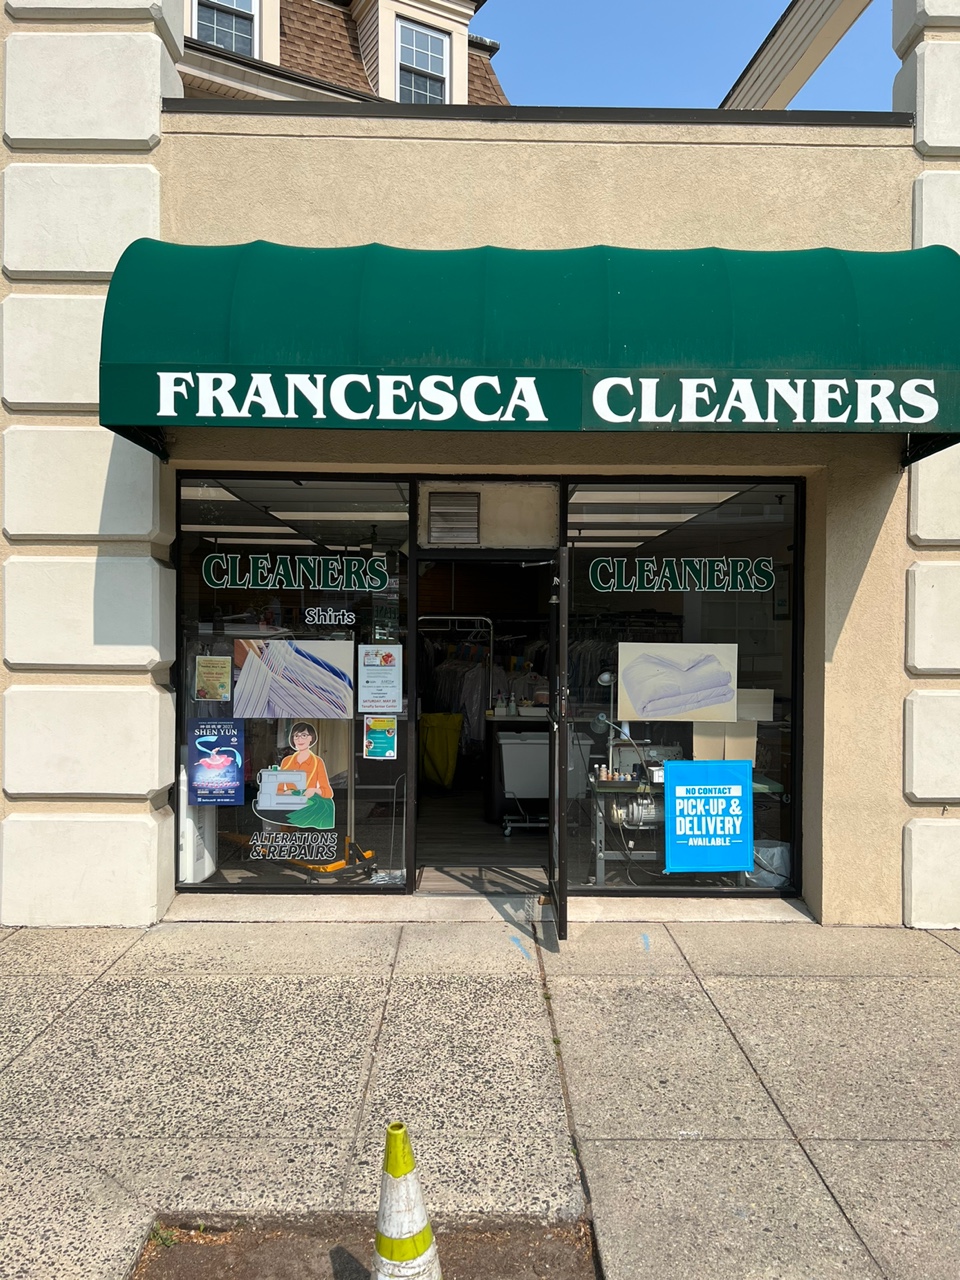 FRANCESCA Cleaners 1 Highwood Ave C, Tenafly New Jersey 07670